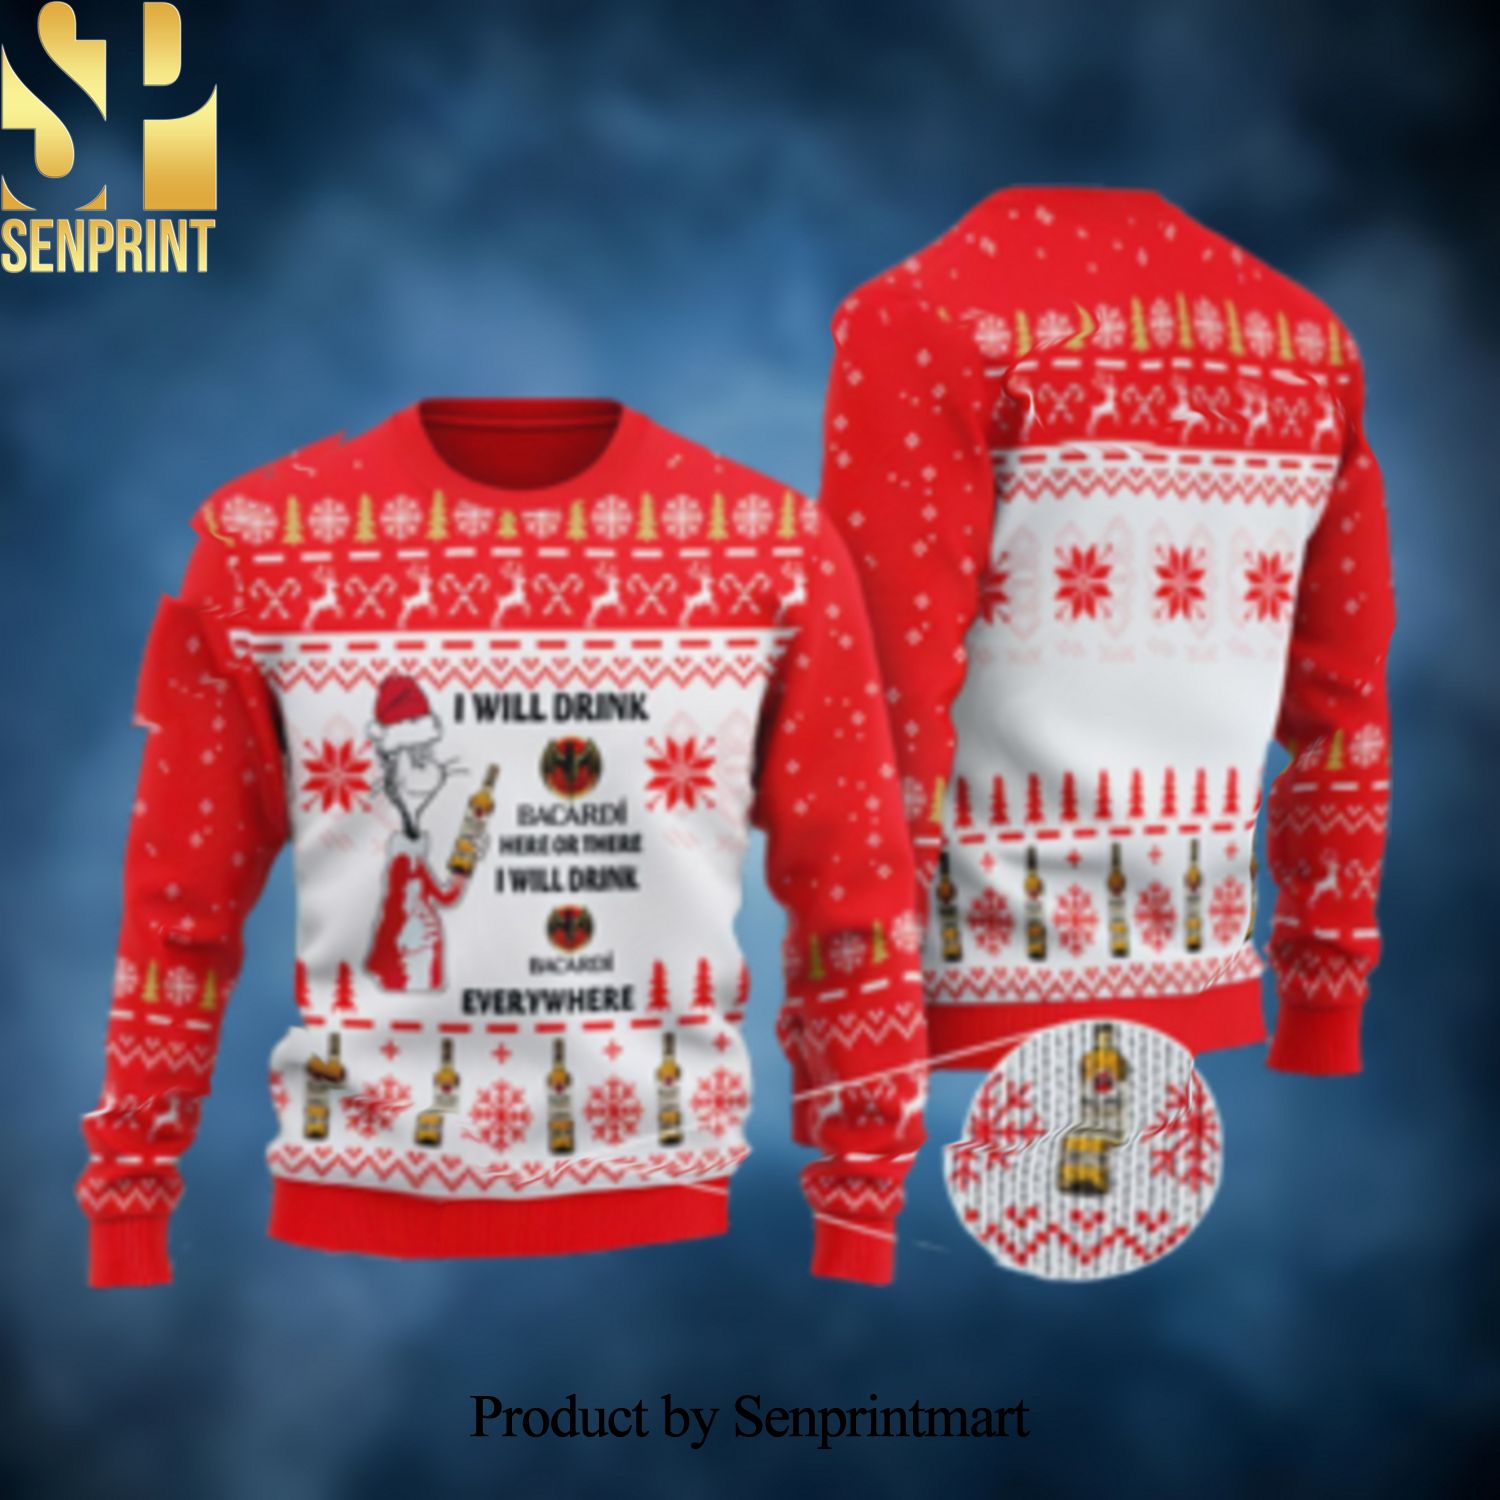 I Will Drink Bacardi Rum Everywhere Knitting Pattern Christmas Ugly Christmas Sweater